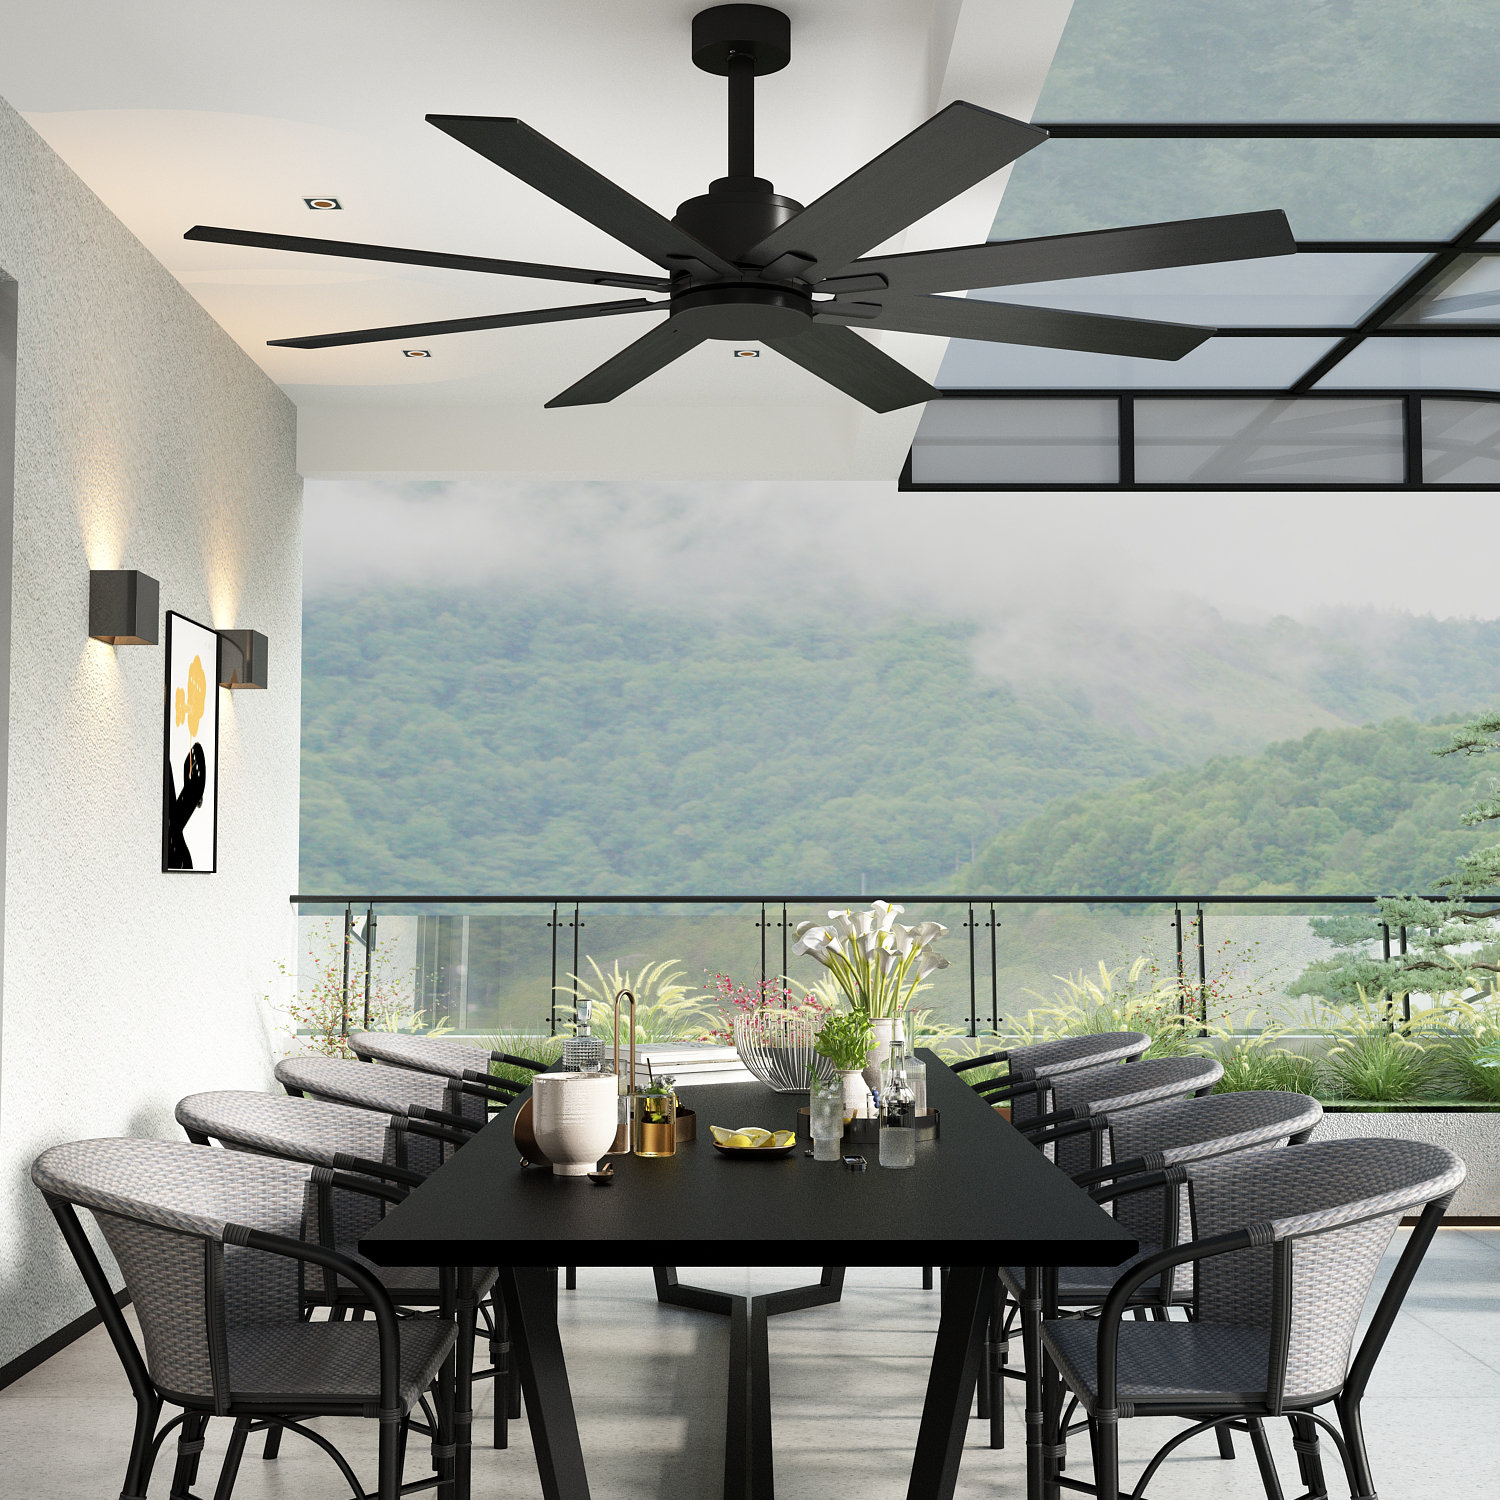 70 Inch Large Ceiling Fan without Light, Damp Rated Outdoor Ceiling Fan for  Patio, 3 Wood Blade Ceiling Fan DC Motor with Remote for Indoor Living